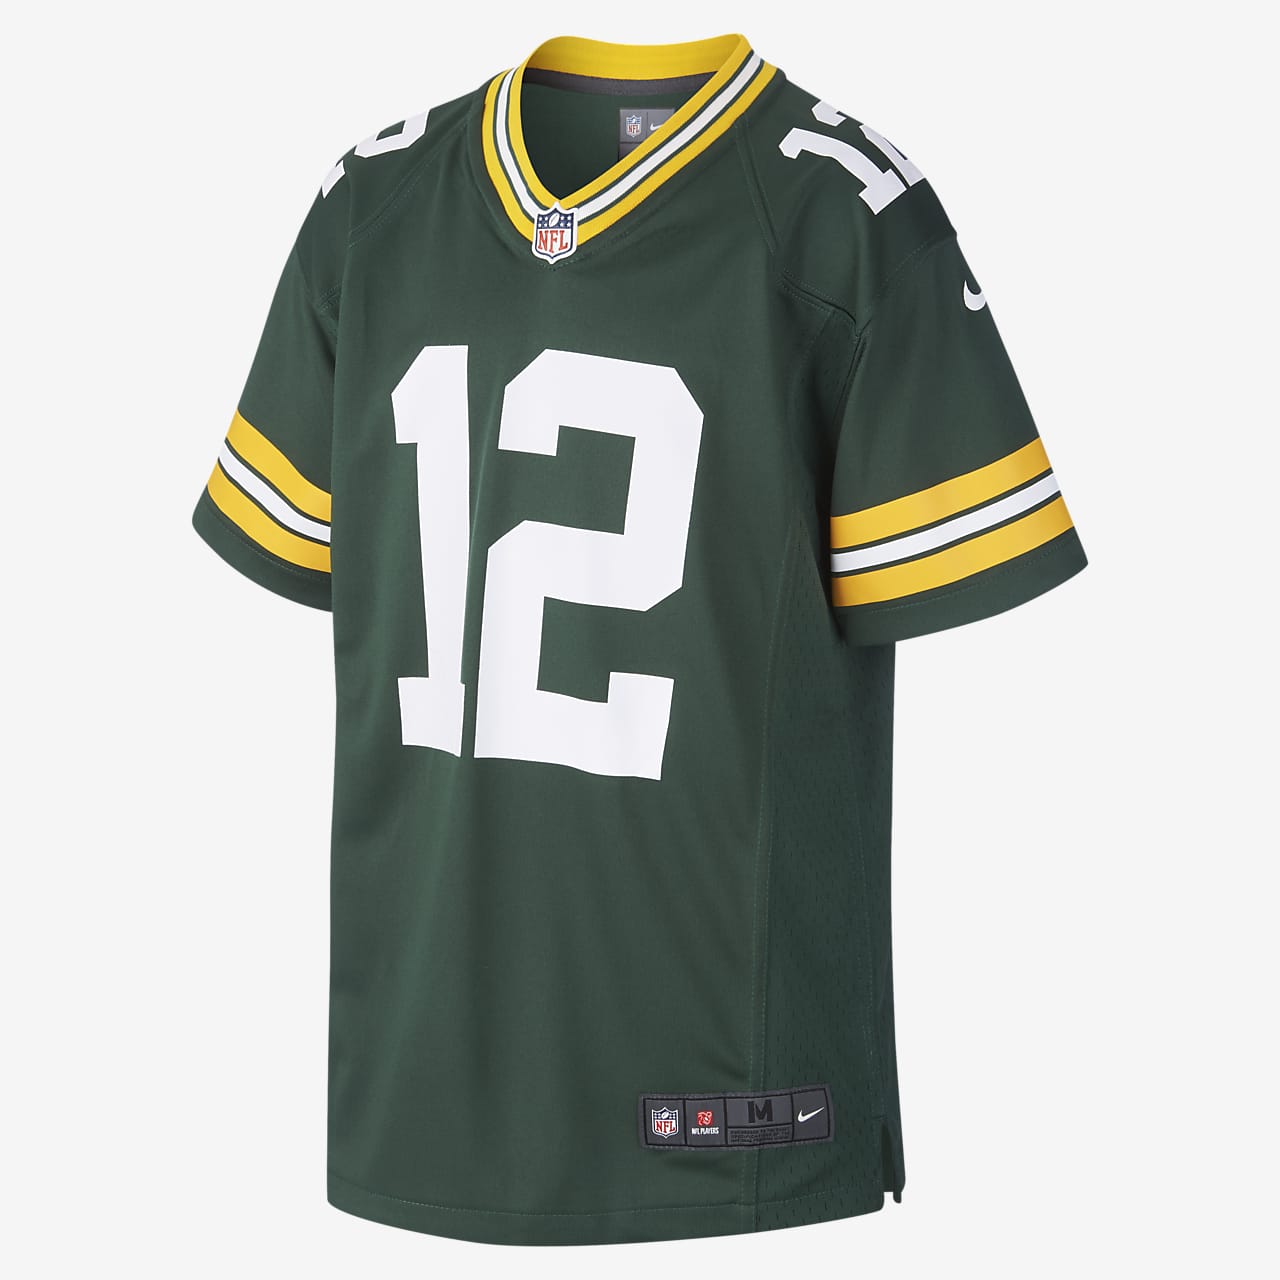 NFL Green Bay Packers Game Jersey (Aaron Rodgers) Older Kids' American Football Jersey